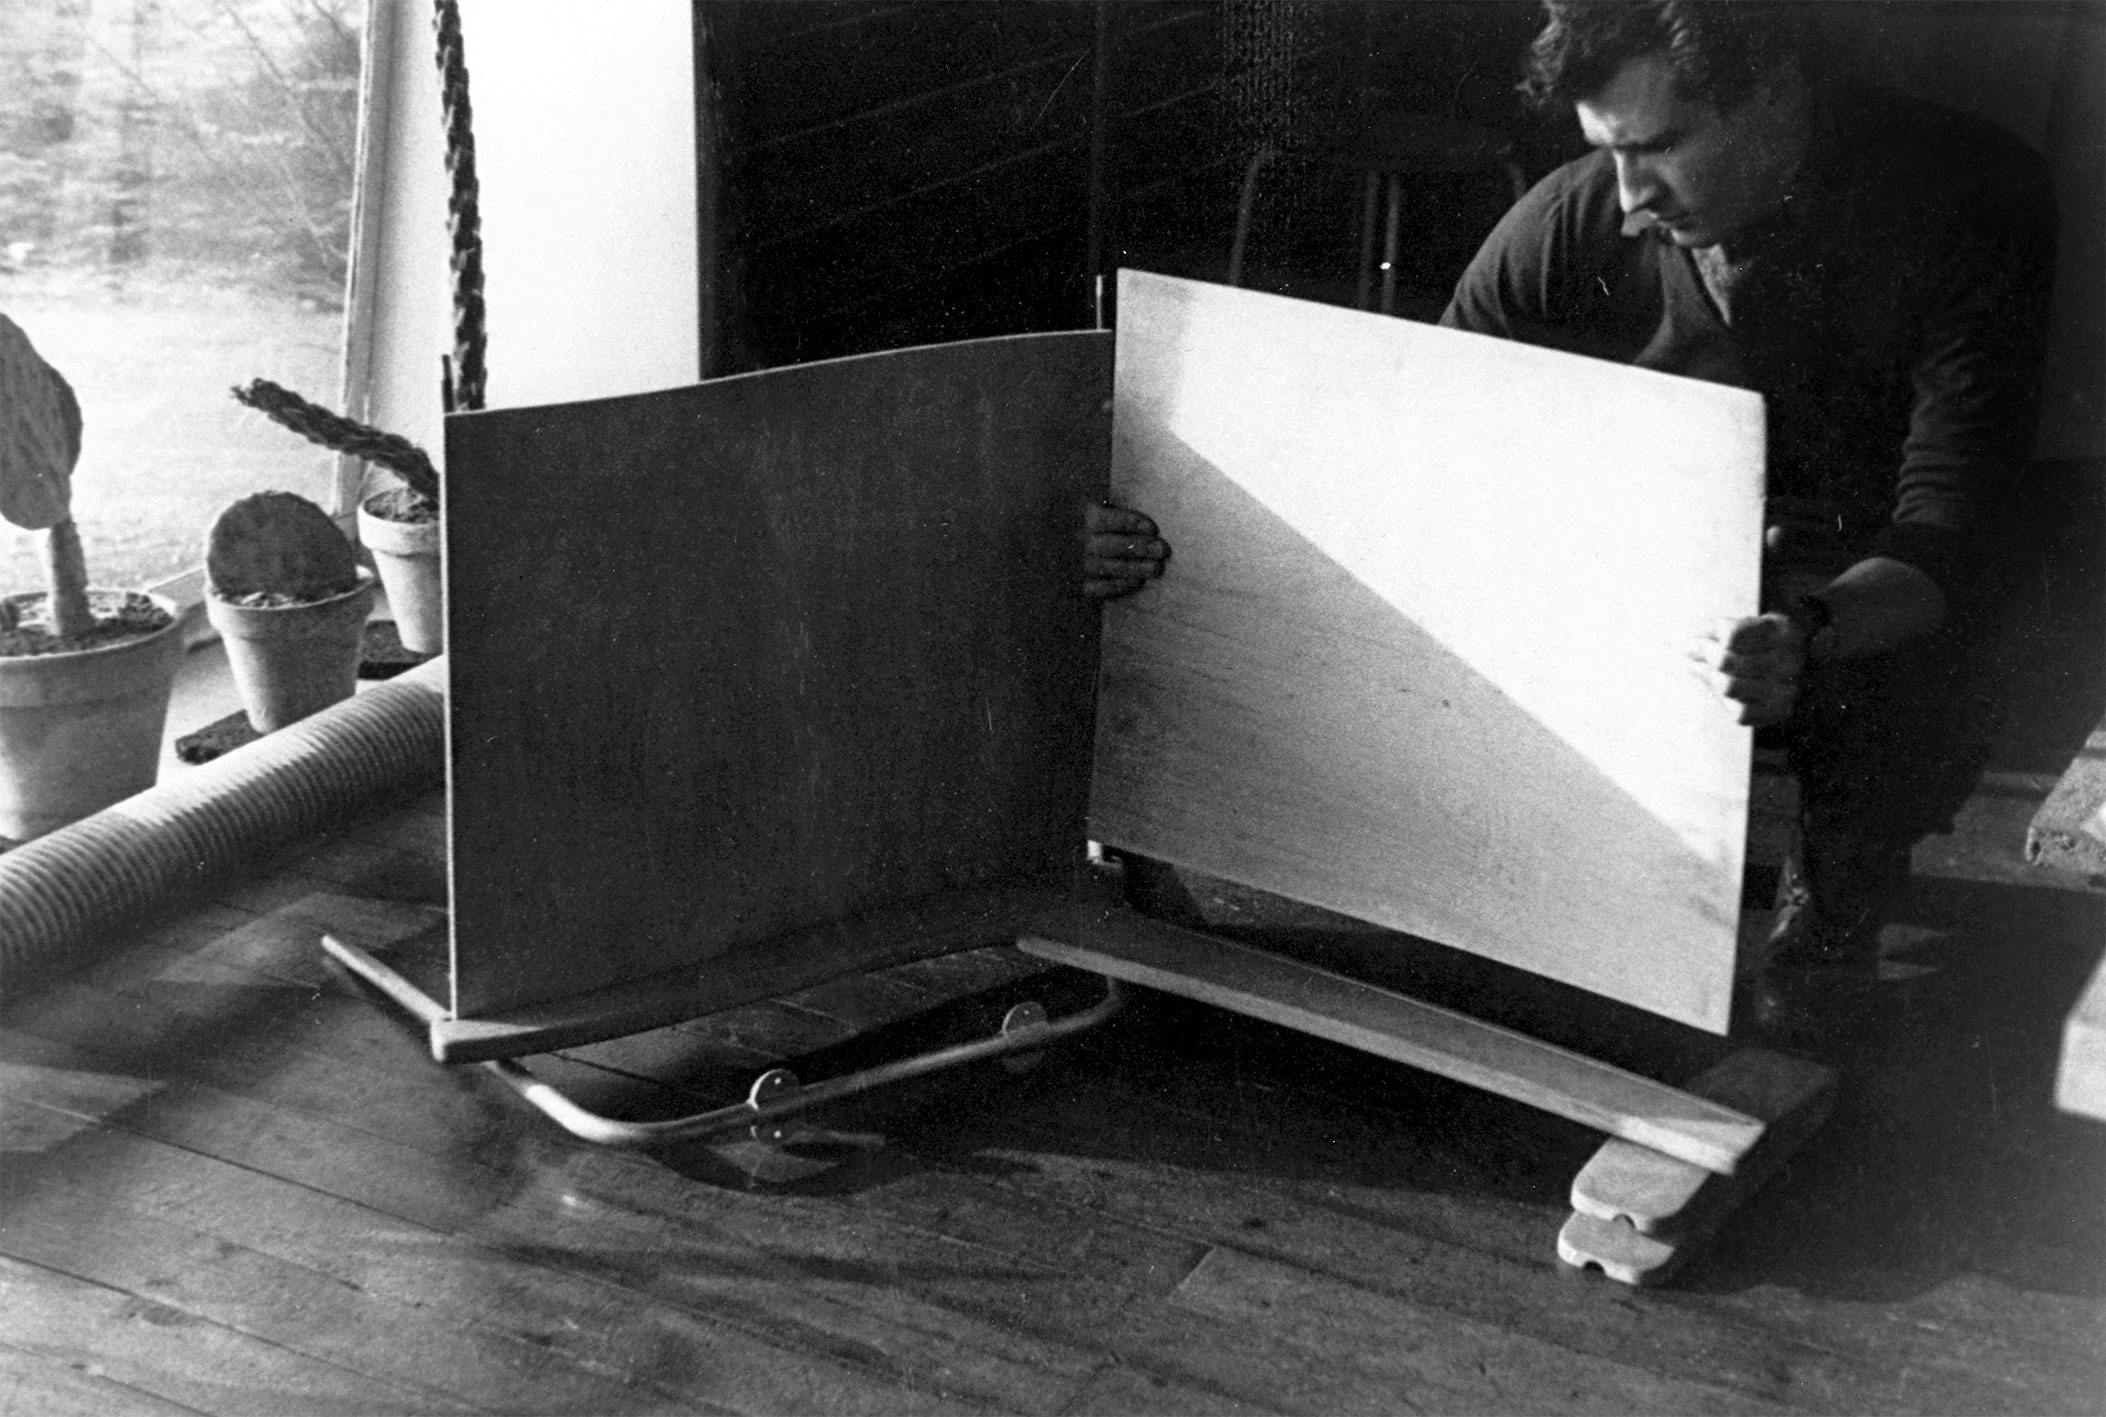 Visiteur Métropole FV 12 armchair. Demonstration of assemblage by André Le Stang, employee of the Ateliers Jean Prouvé, in Jean Prouvé’s office in Maxéville, ca. 1949.